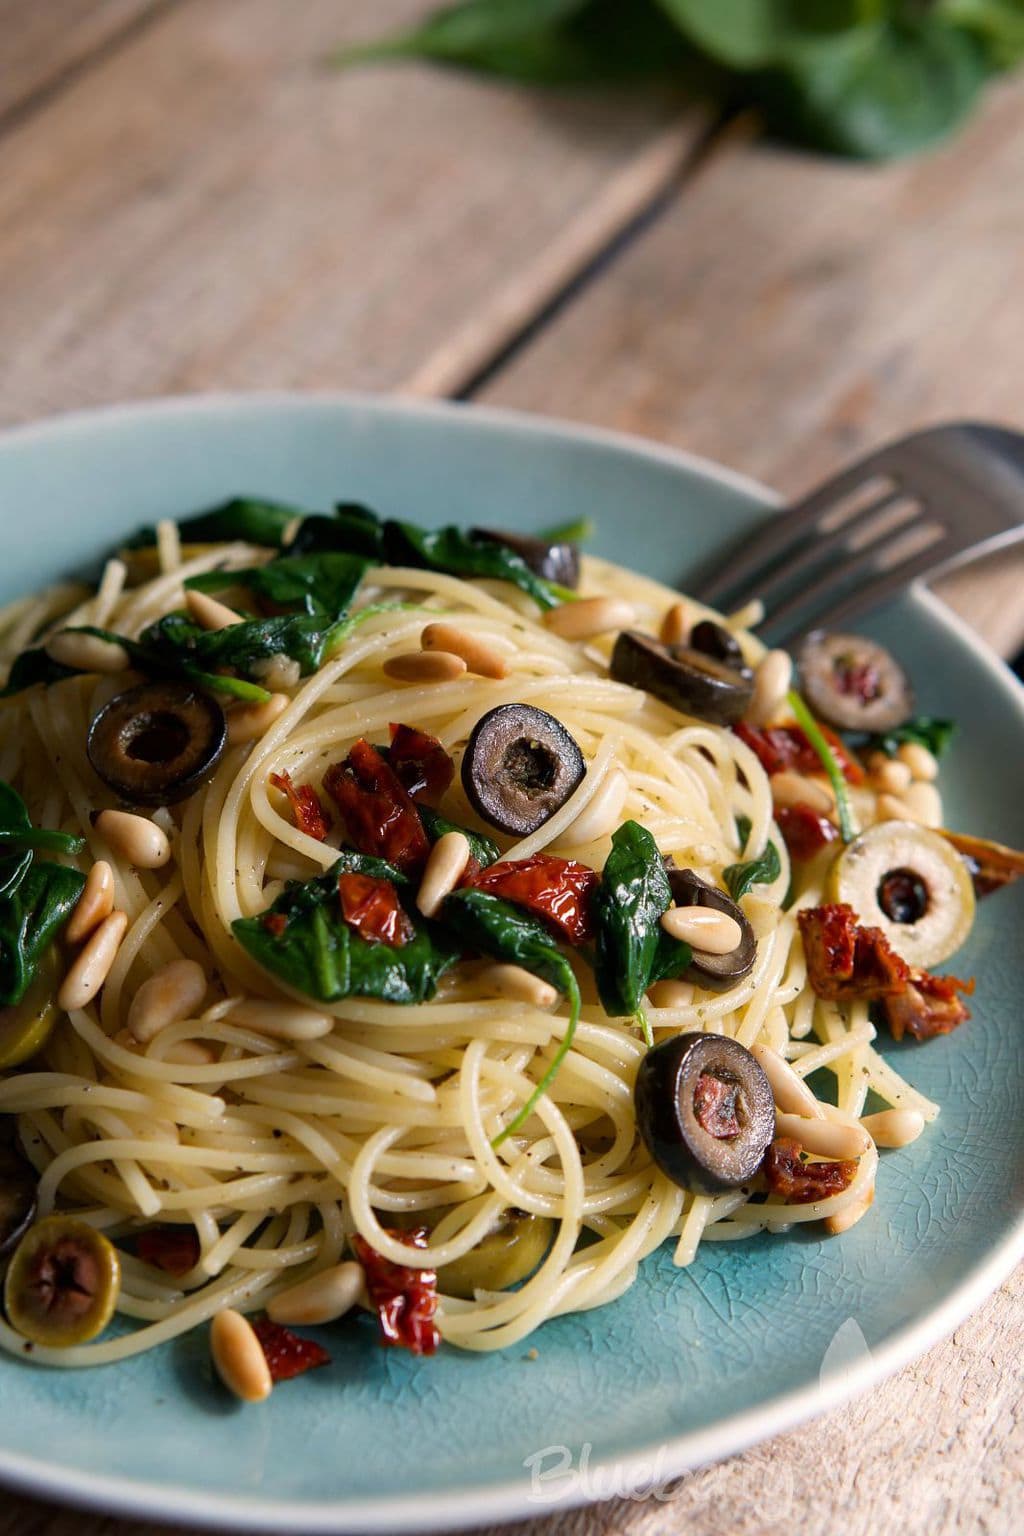 Tangy Spaghetti with Olives, Spinach and Dried Tomatoes